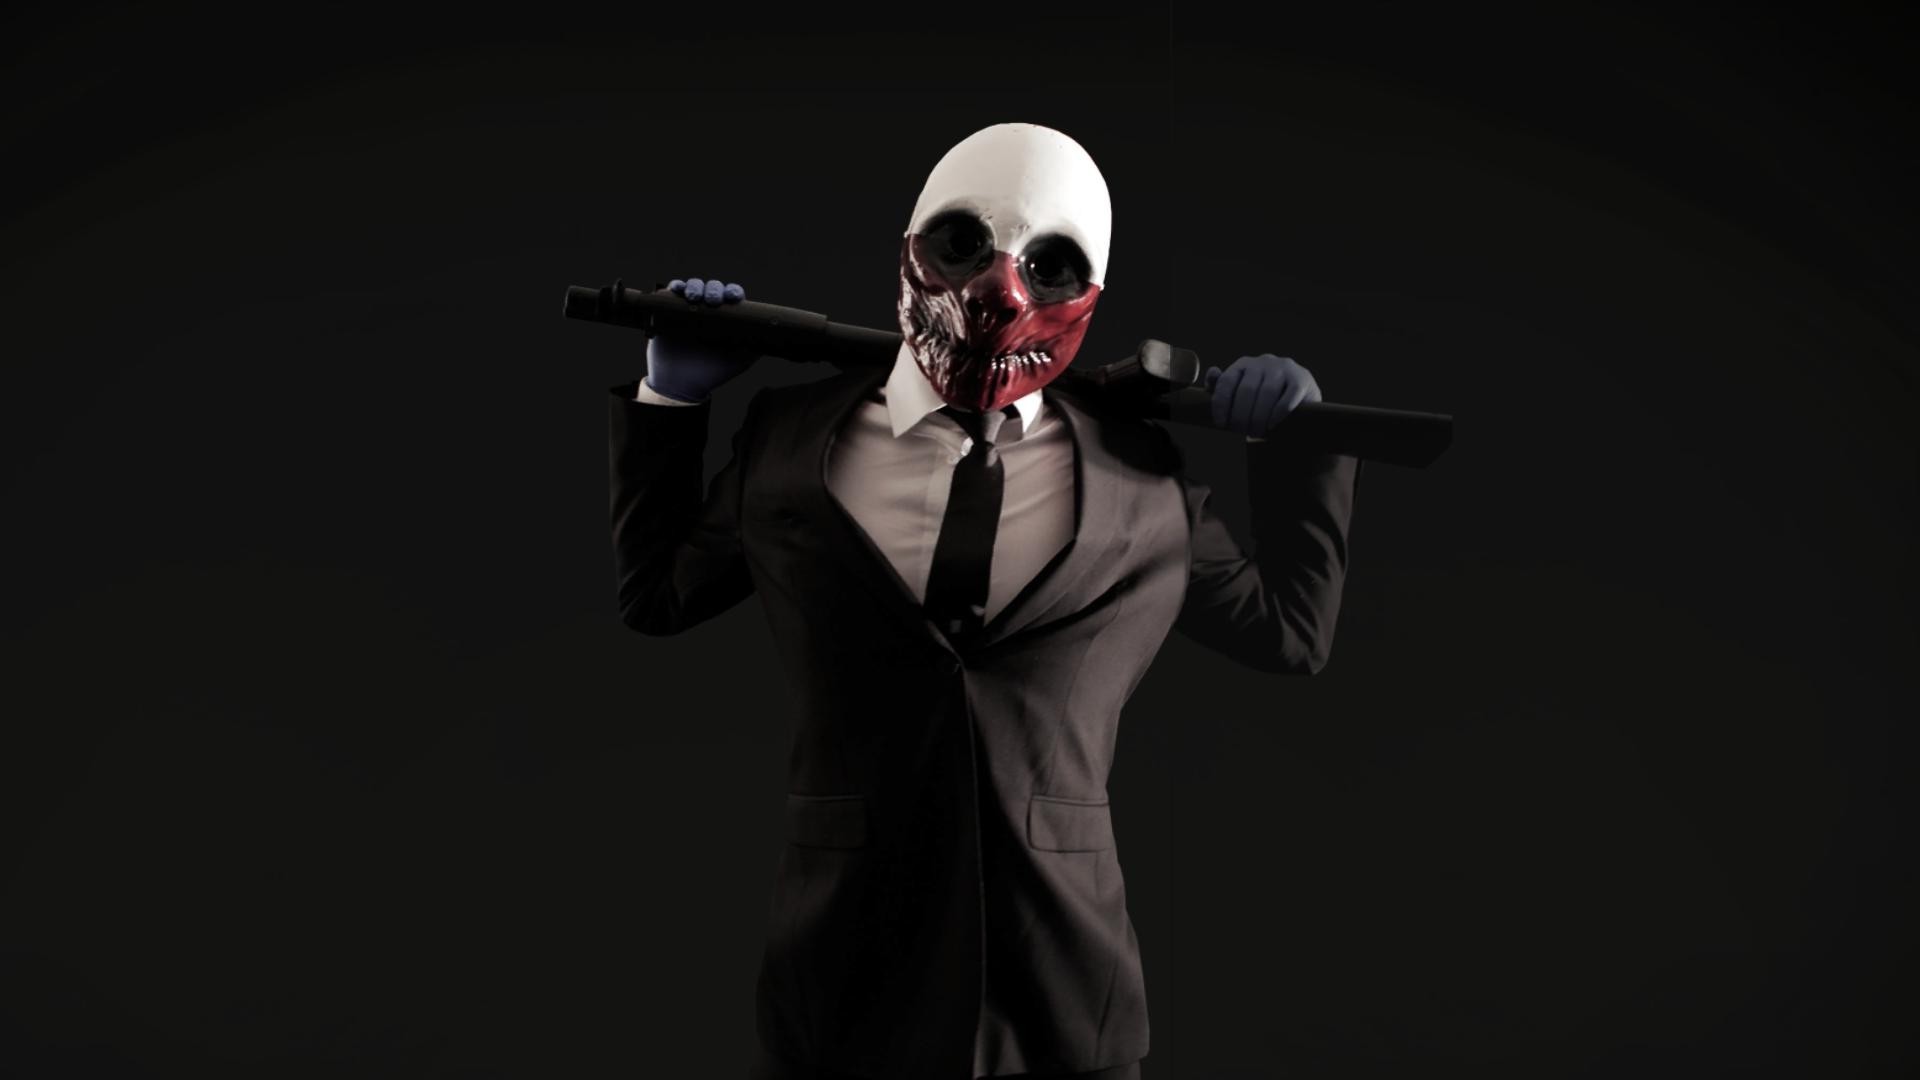 download payday pc